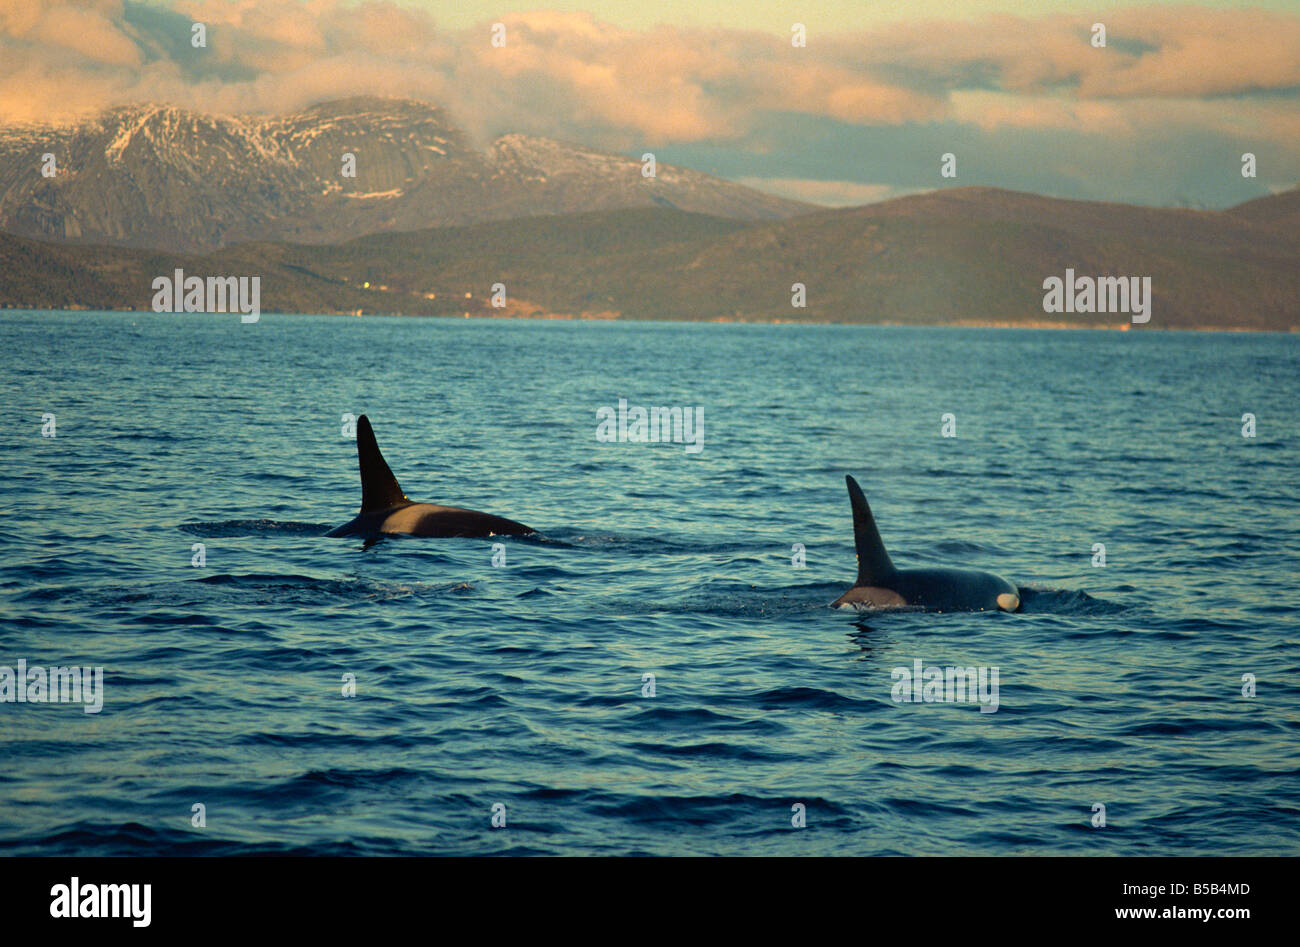 Killer whales (Orcinus Orca) research, wintertime, Tysfjord, Arctic, Norway, Scandinavia, Europe Stock Photo